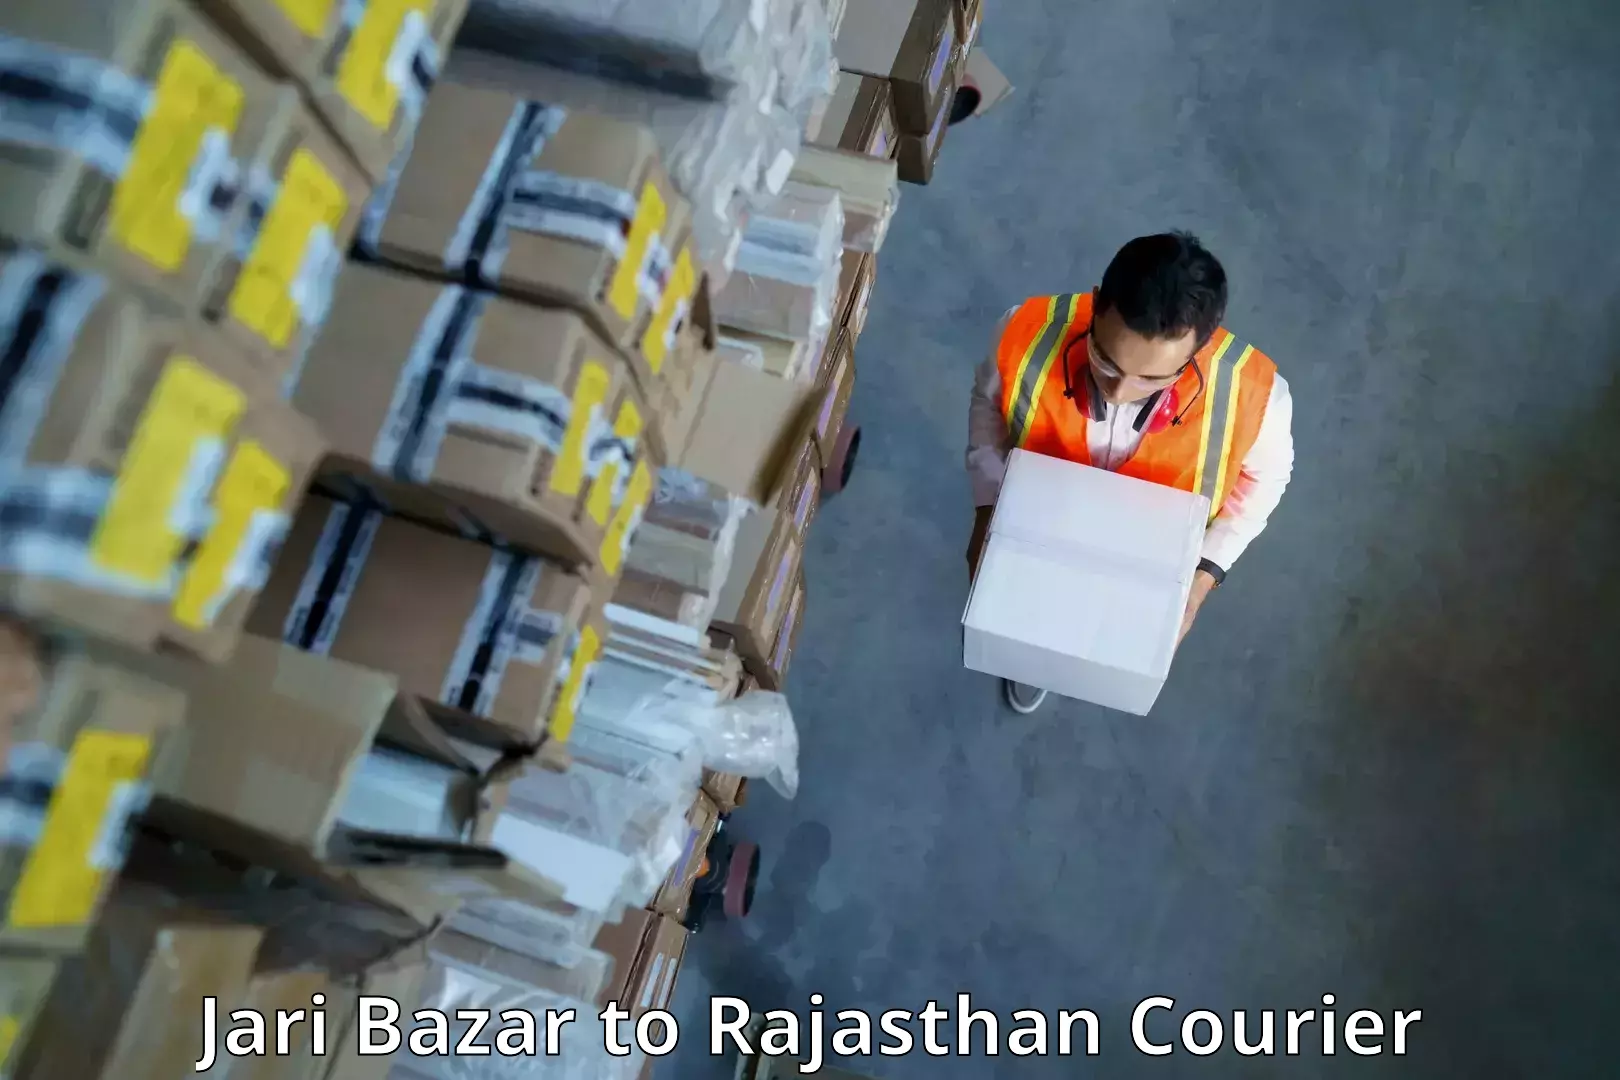 Overnight delivery services Jari Bazar to Piparcity